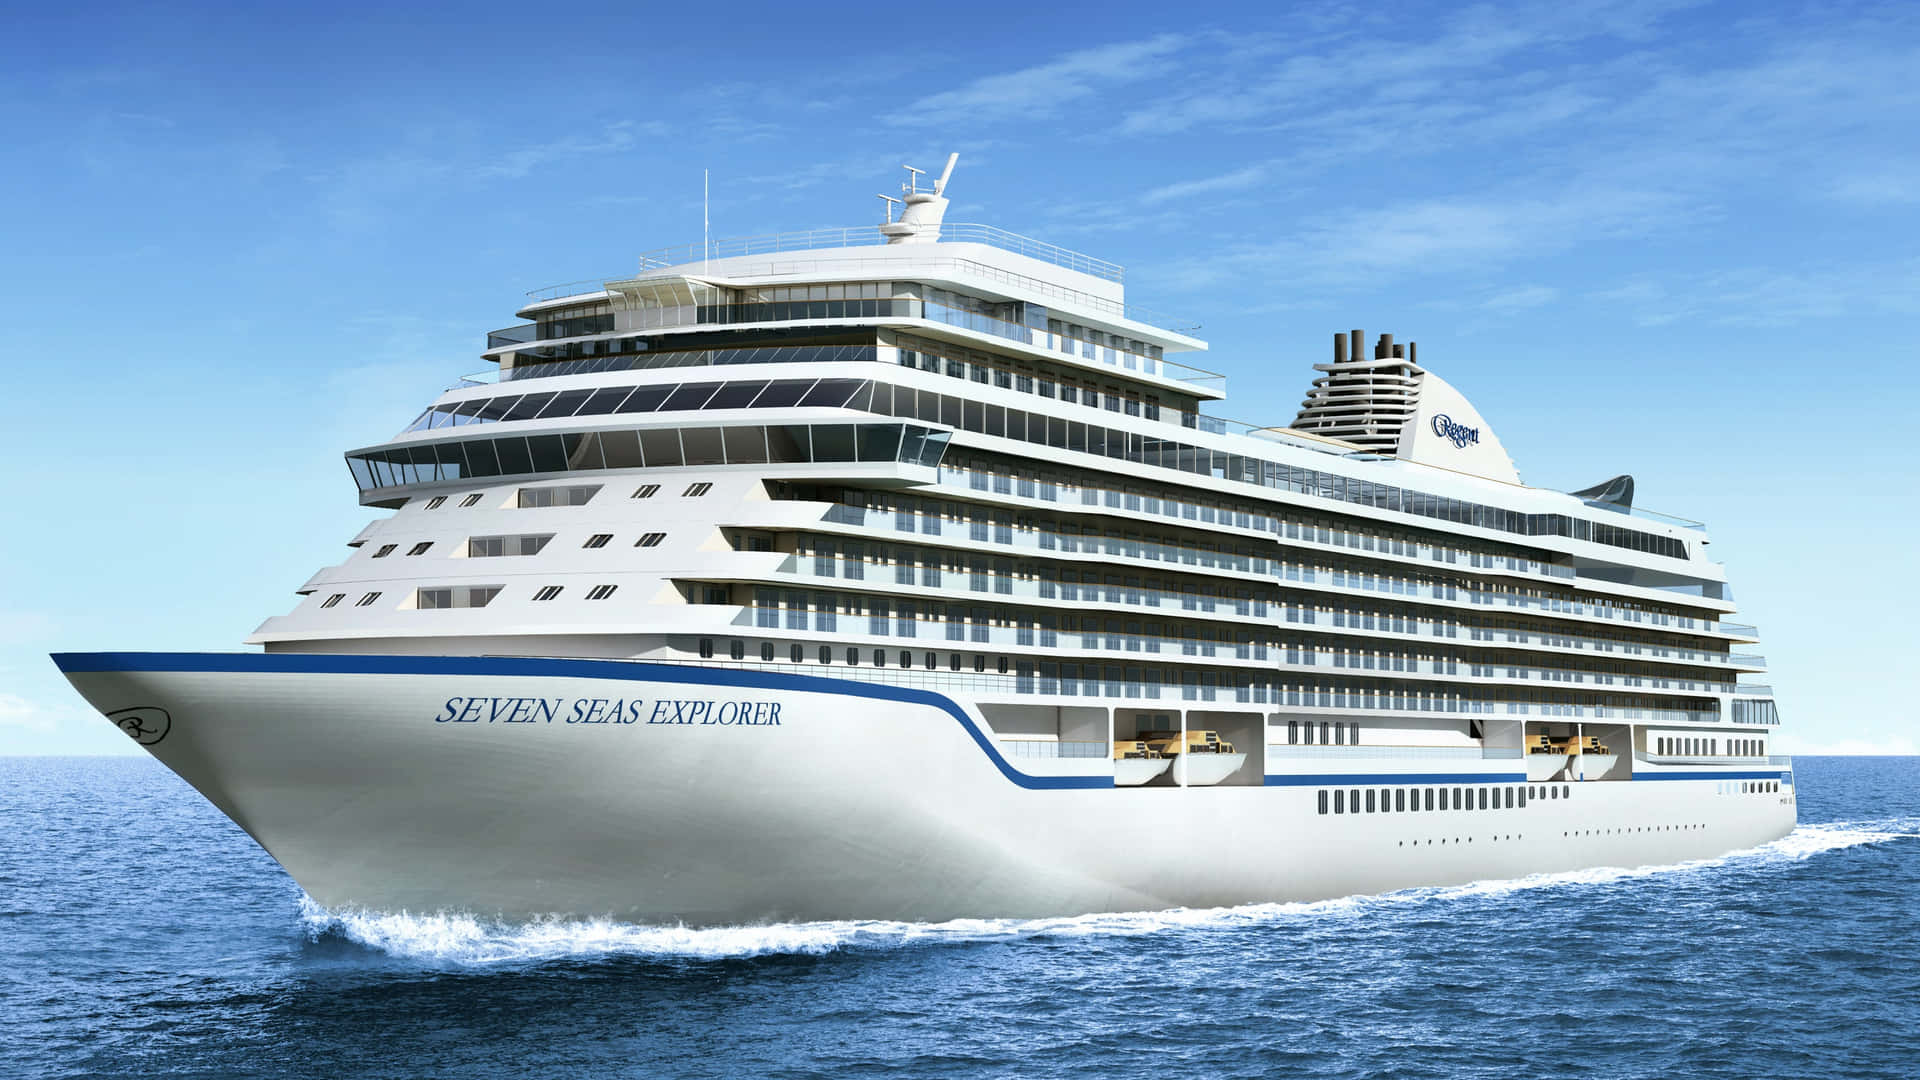 Enjoy the best of land and sea as you embark on a cruise ship voyage